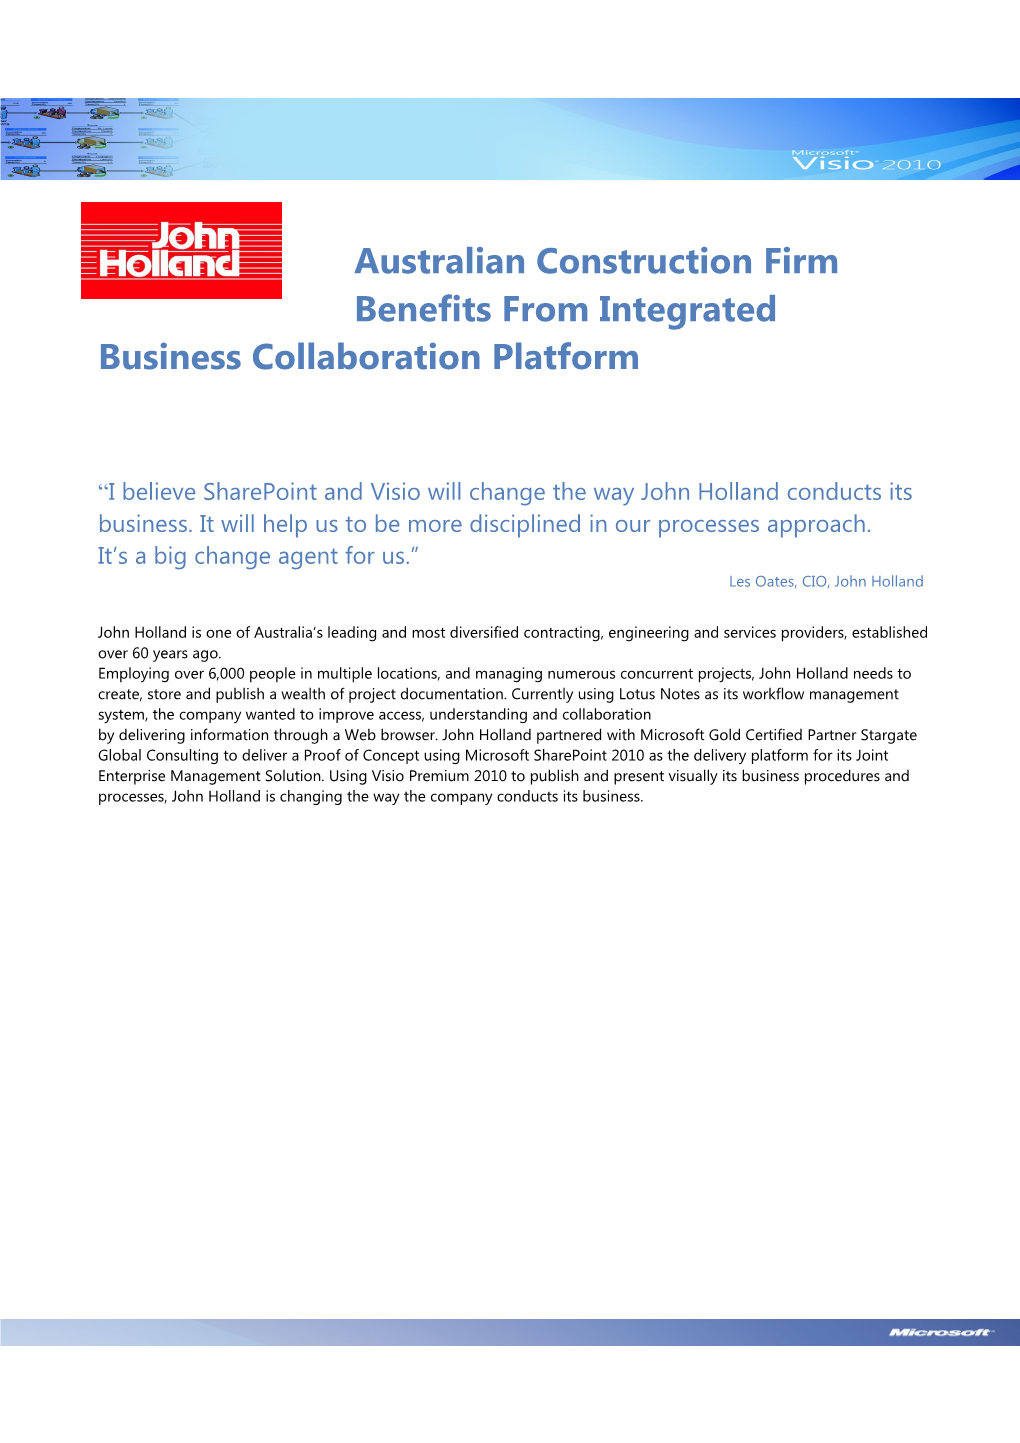 John Holland Is One of Australia S Leading and Most Diversified Contracting, Engineering